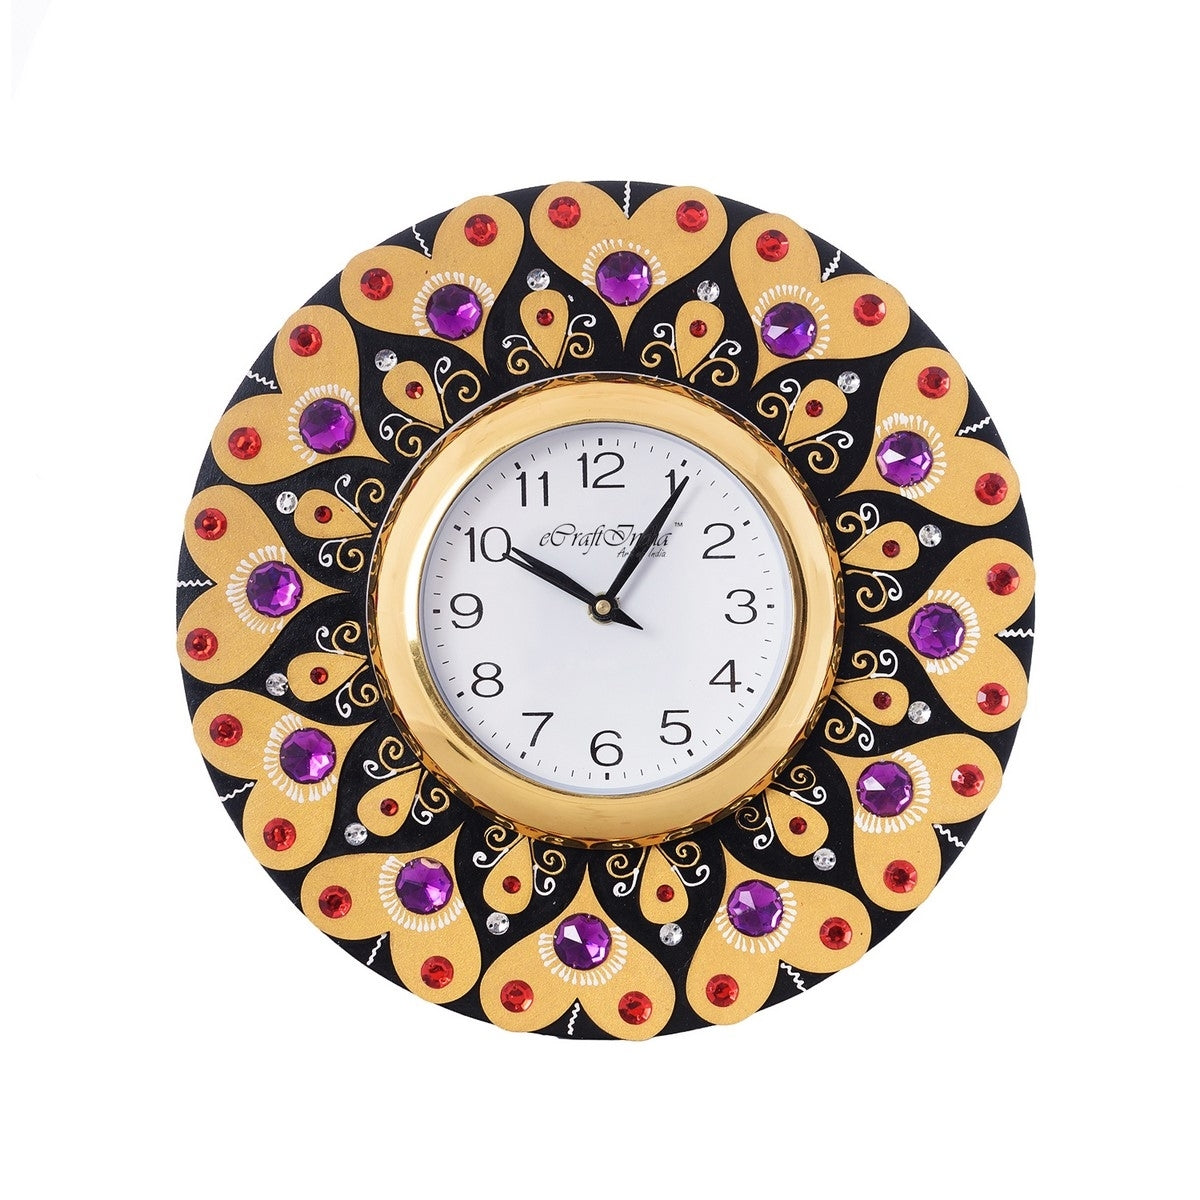 Purple and Red Crystal on Adorning Heart Wooden Handcrafted Wall Clock